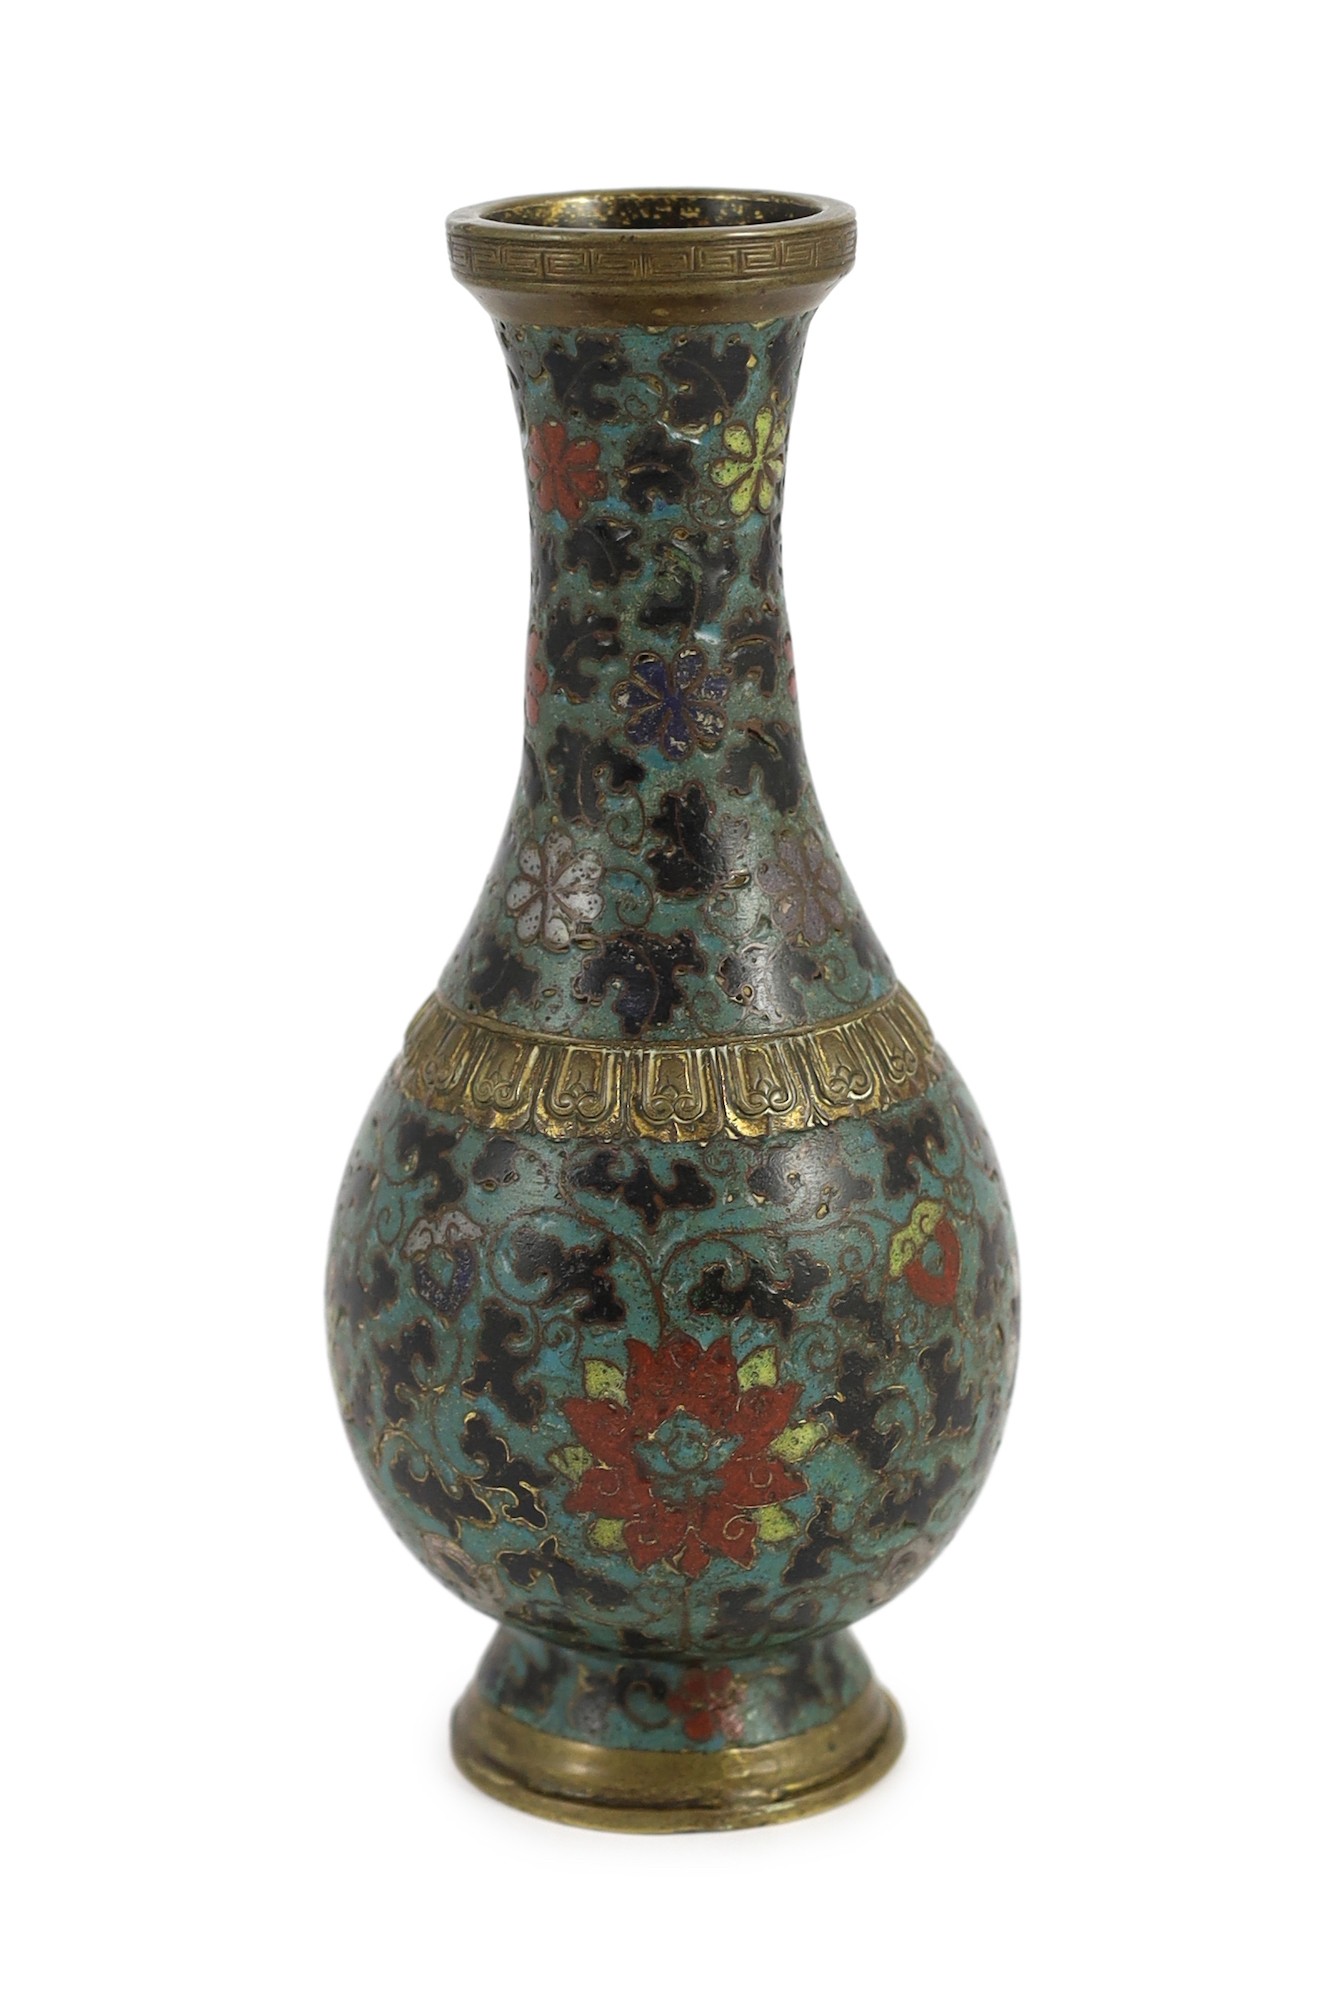 A Chinese cloisonné enamel and gilt bronze baluster vase, 17th/18th century, 19.5cm high, faults